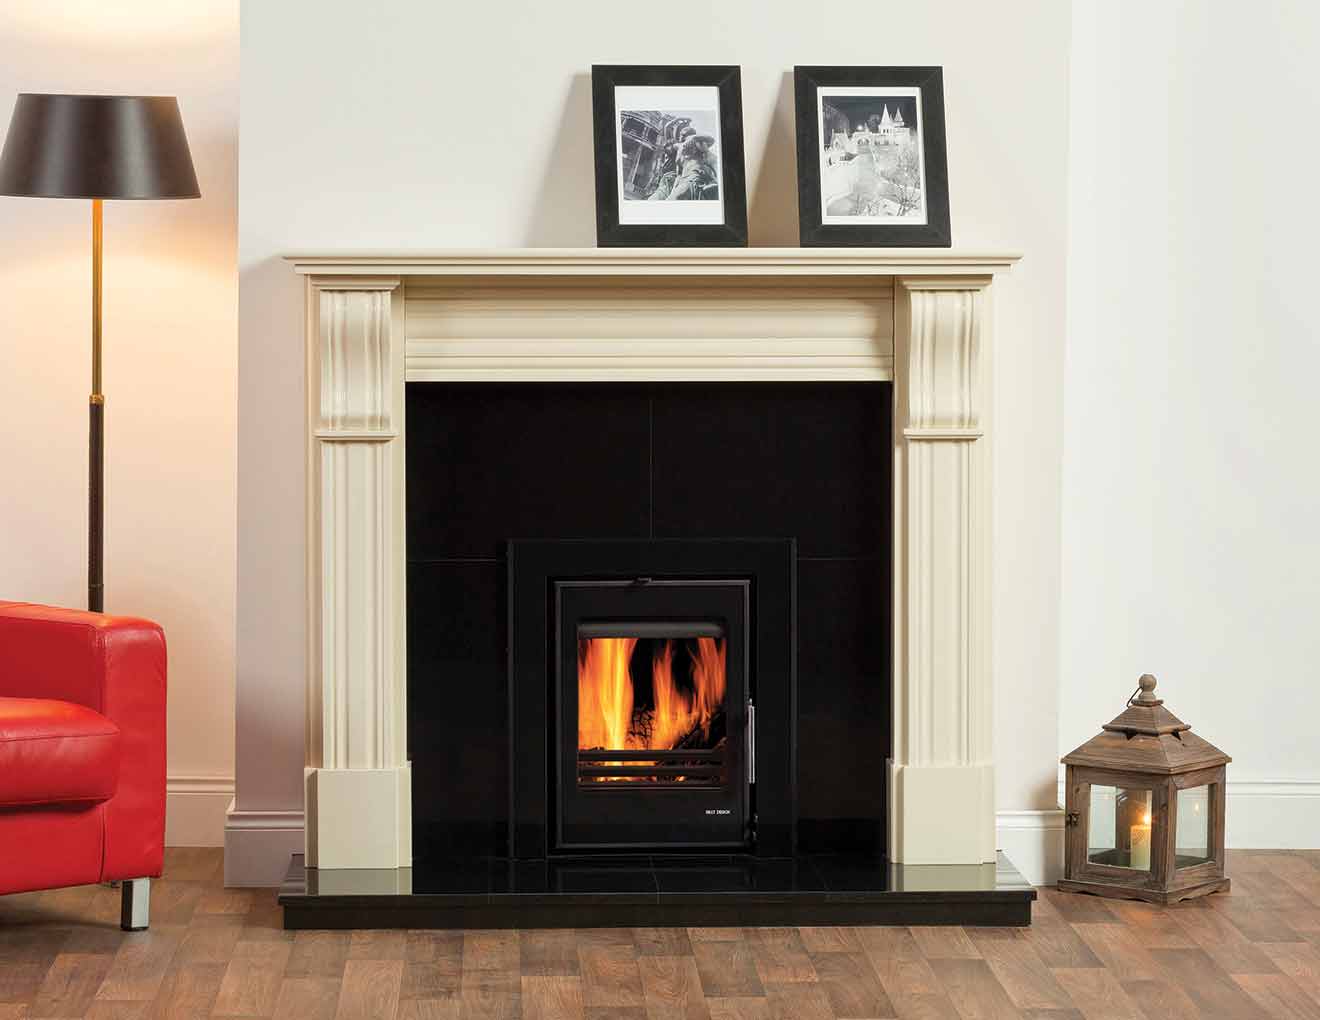 Dublin Corbel White Fireplace Bundle, including Black Hearth and Back Panel